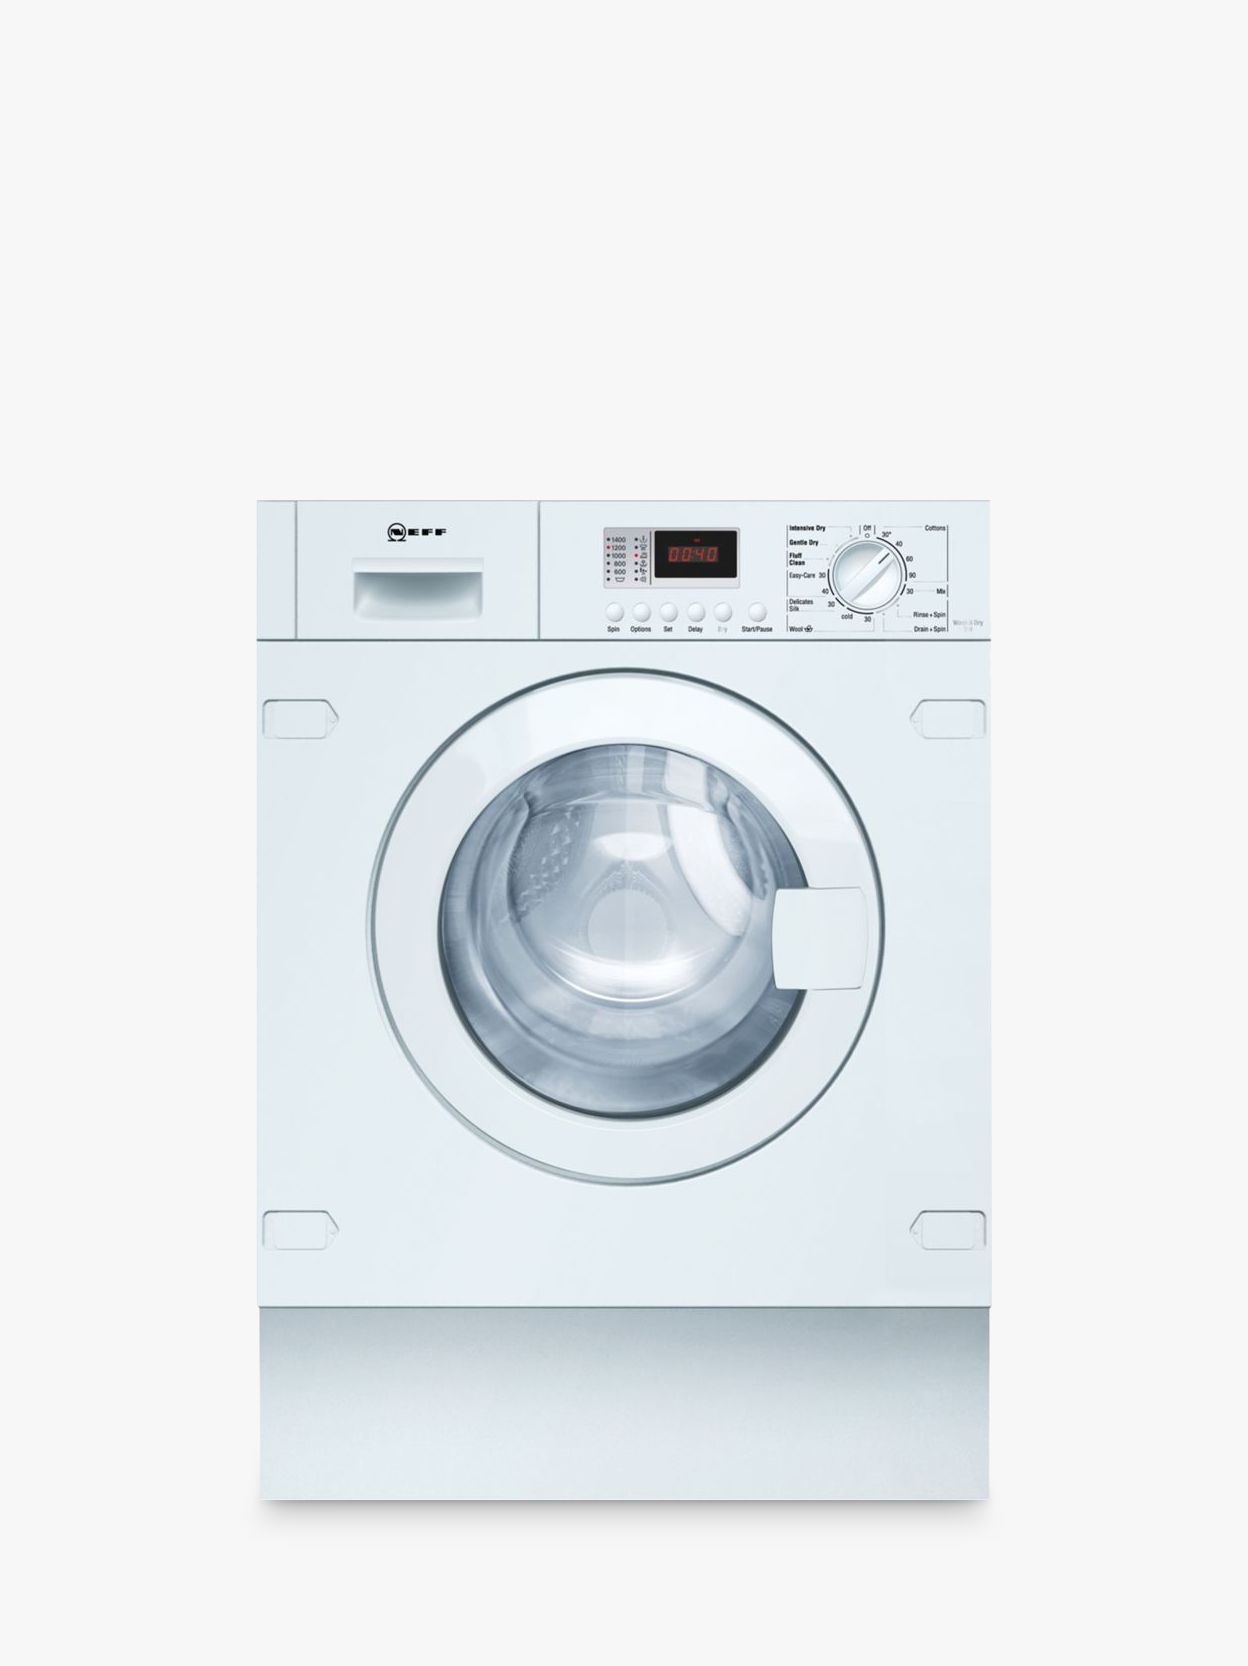 Neff V6320X1GB Integrated Washer Dryer, 7kg Wash/4kg Dry Load, B Energy Rating, 1400rpm Spin